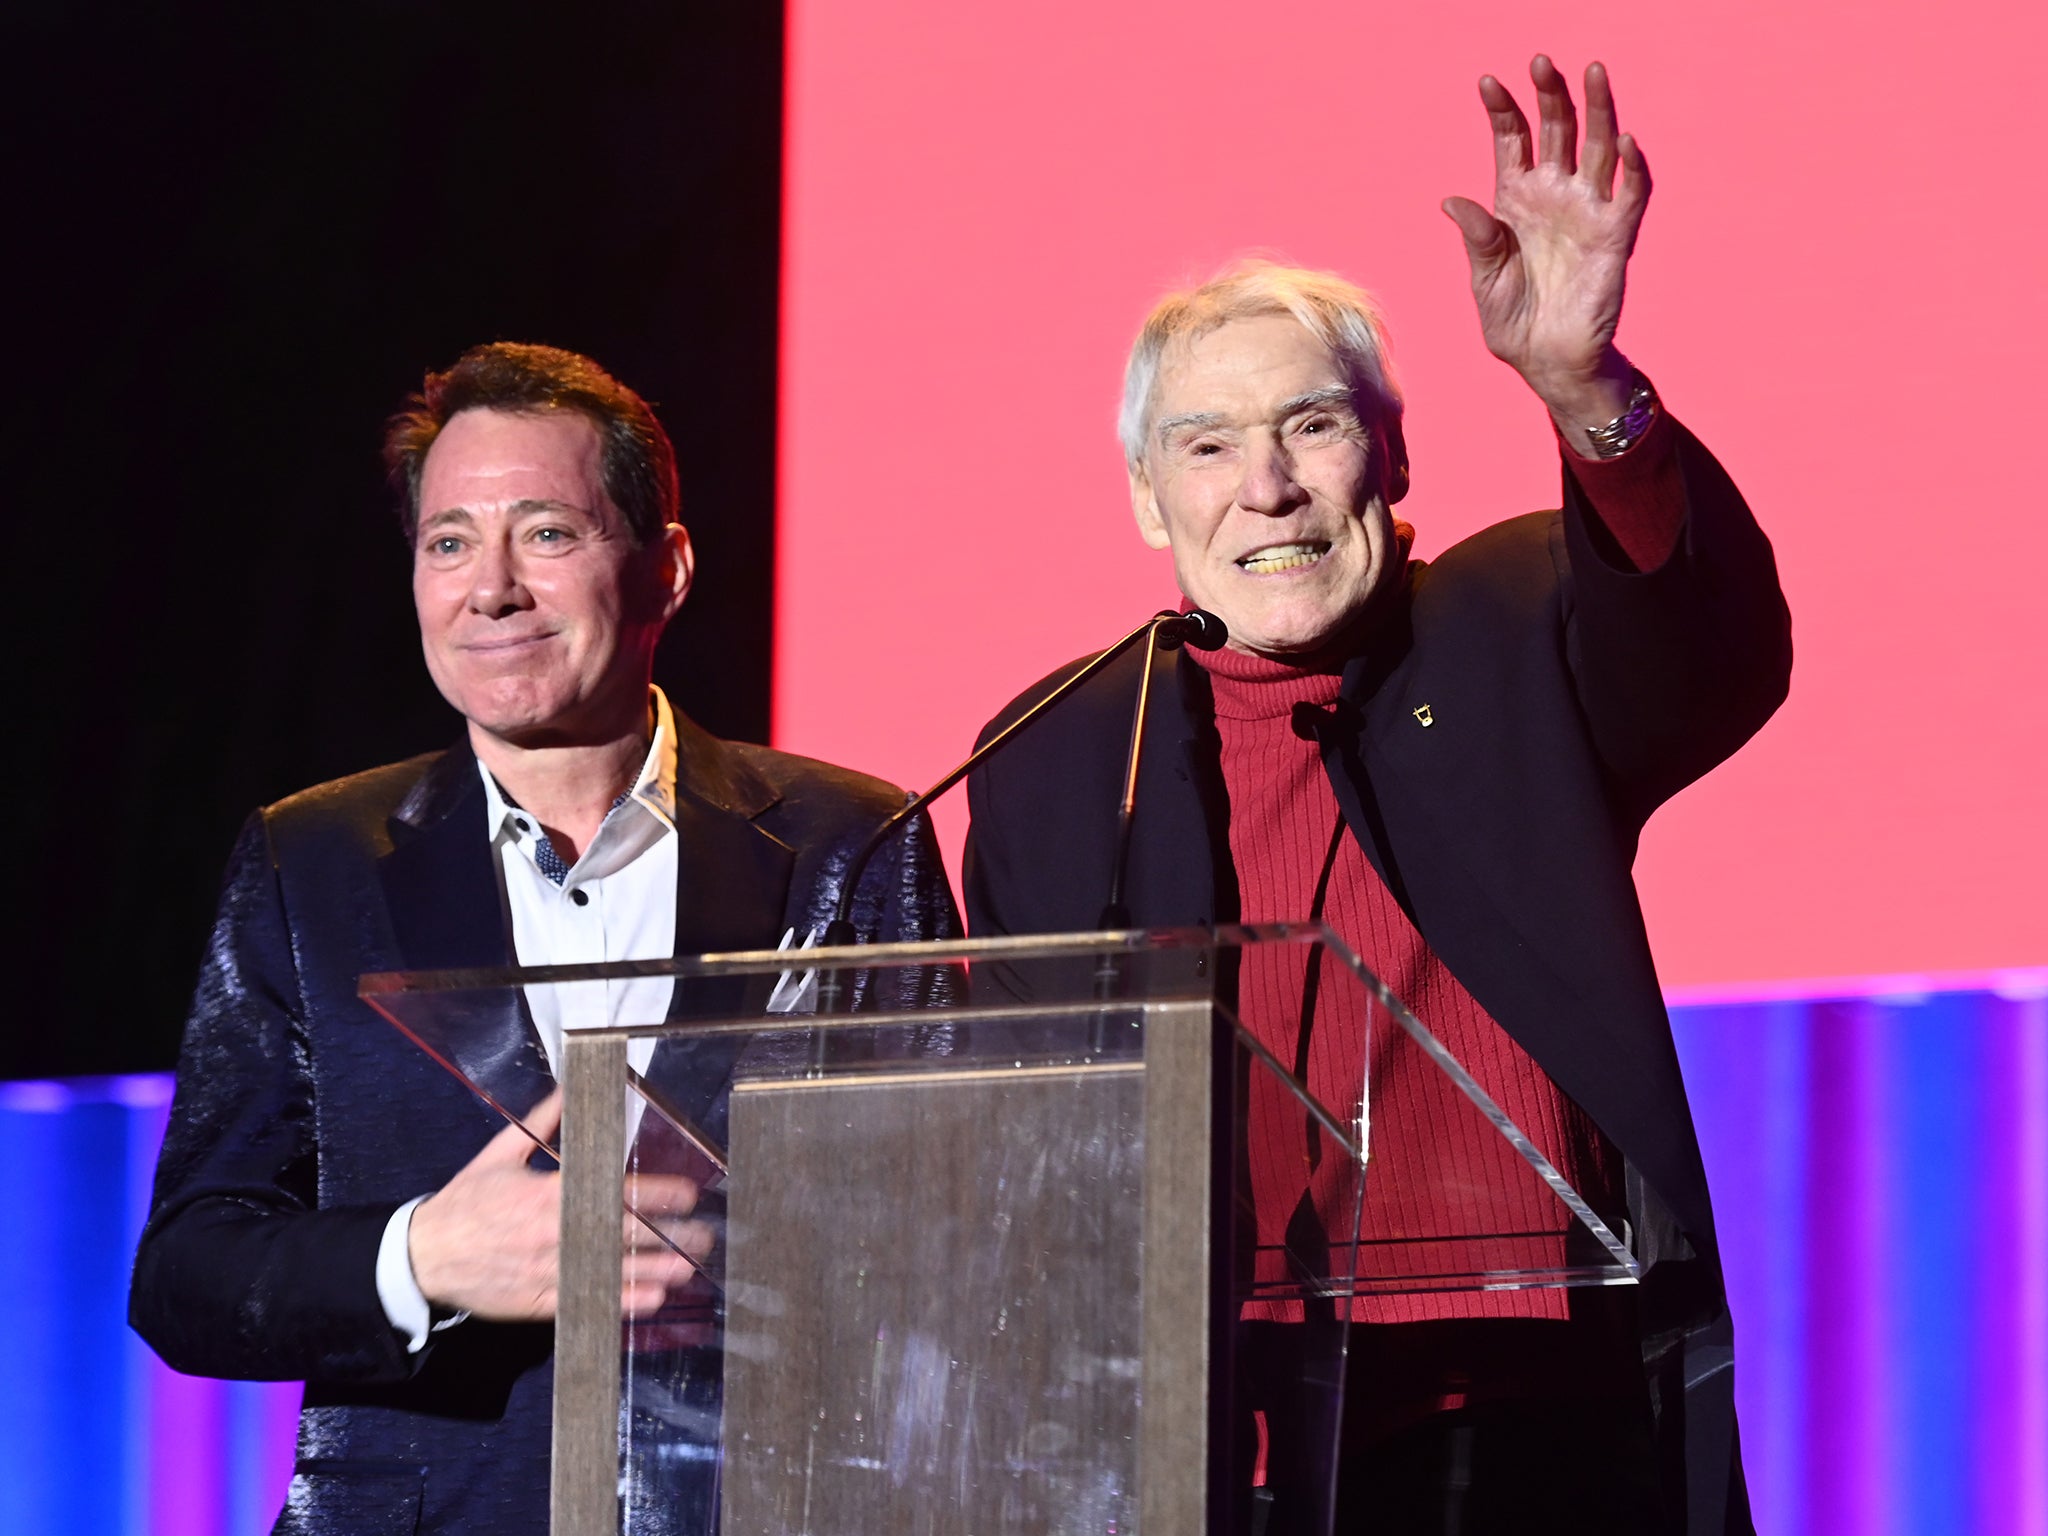 D'Amboise speaks on stage at the National Dance Institute’s annual gala in New York in 2019